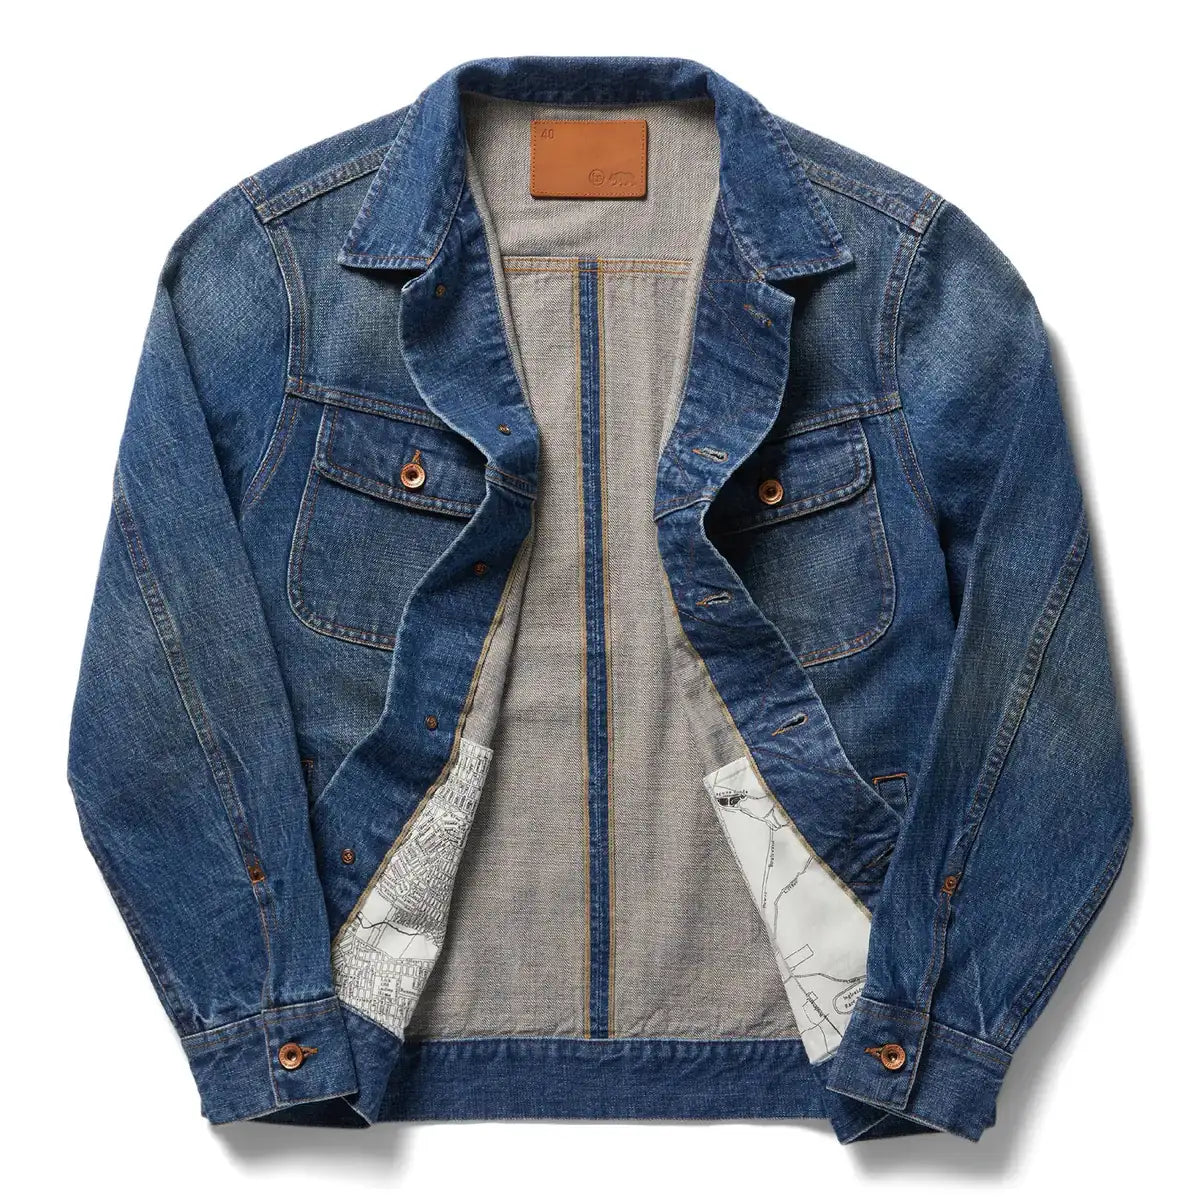 Taylor Stitch - TAYLOR STITCH THE LONG HAUL JACKET IN SAWYER WASH ORGANIC SELVAGE - Rent With Thred